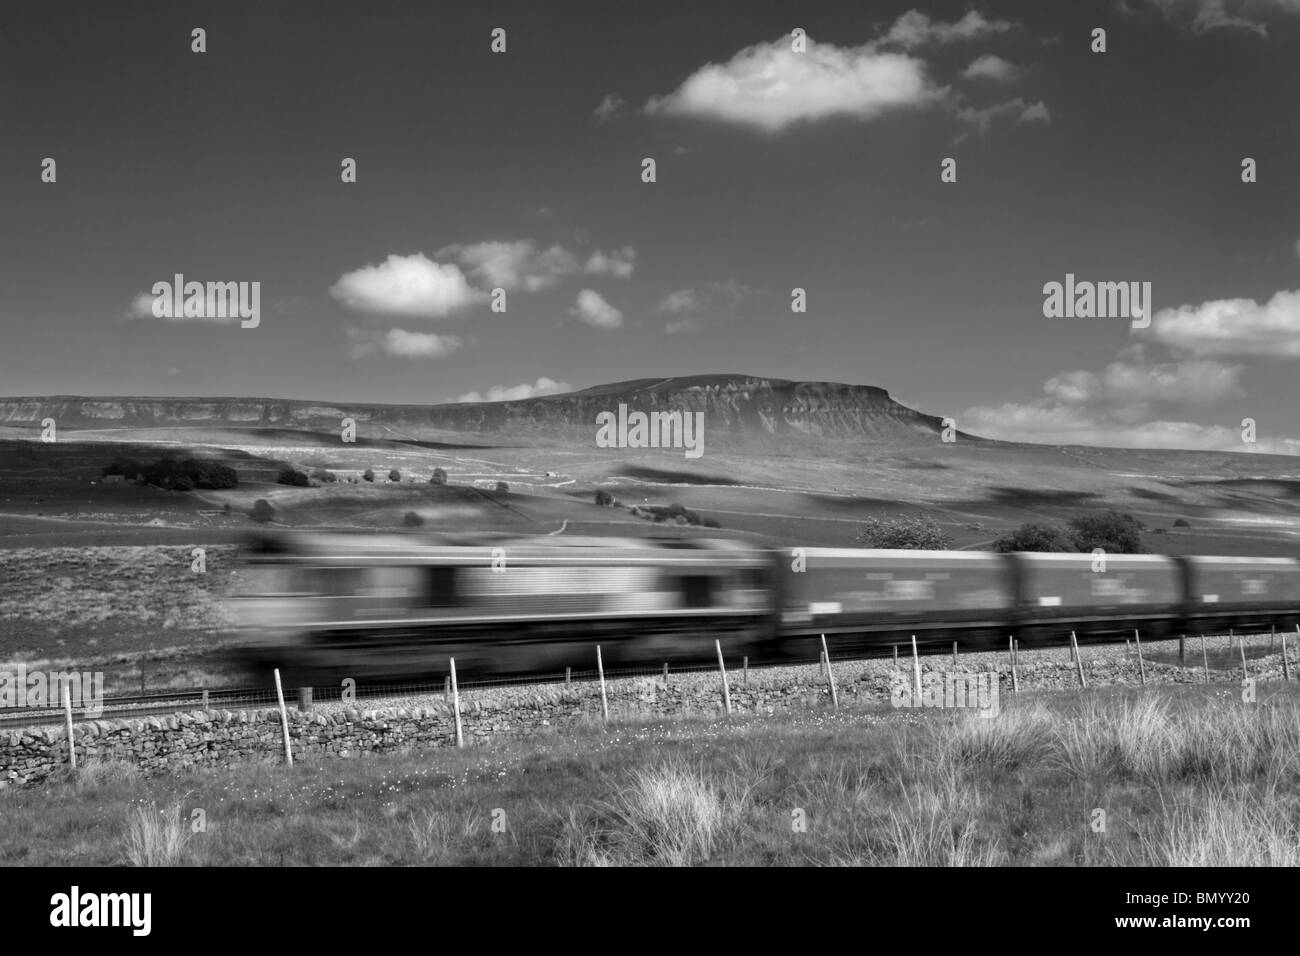 A Freight Train passes Penyghent, near Selside in the Yorkshire Dales National Park, England. Stock Photo